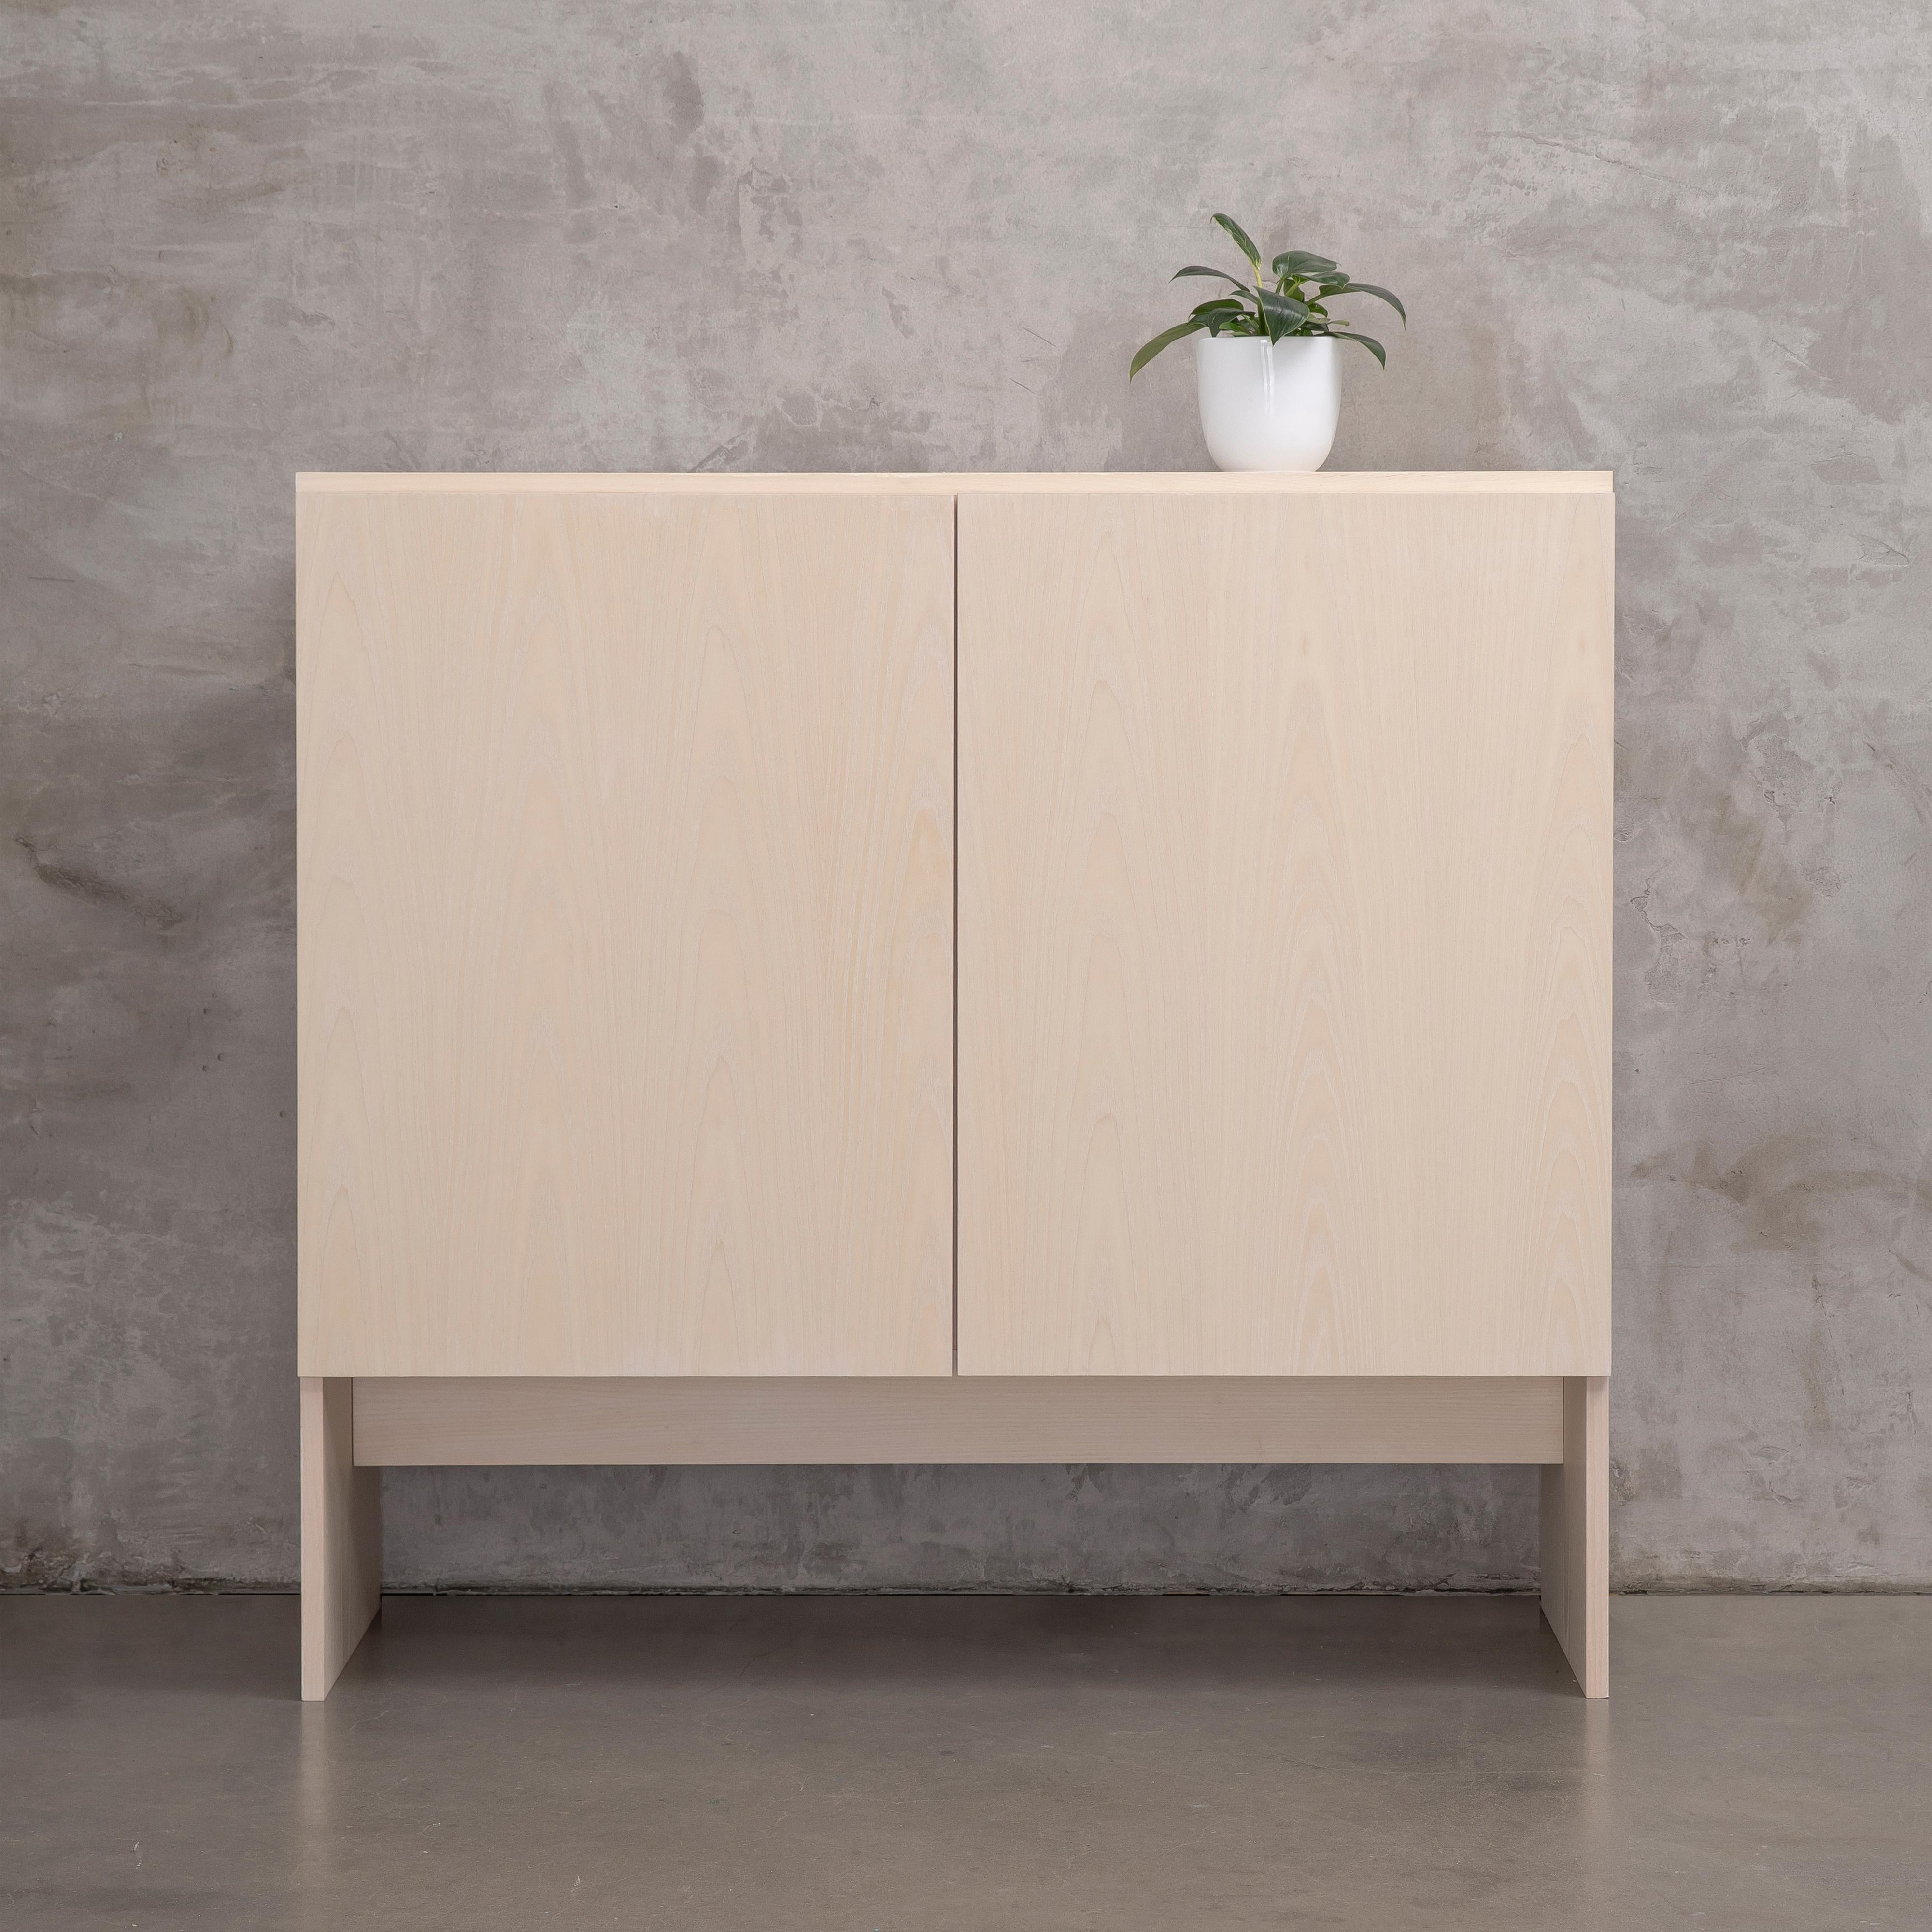 Simple in design yet sophisticated in presence, the Slab cabinet is a practical storage solution suitable for homes and offices.

The geometric profile of this modern storage cabinet combines clean lines and angles, accentuated by the positioning